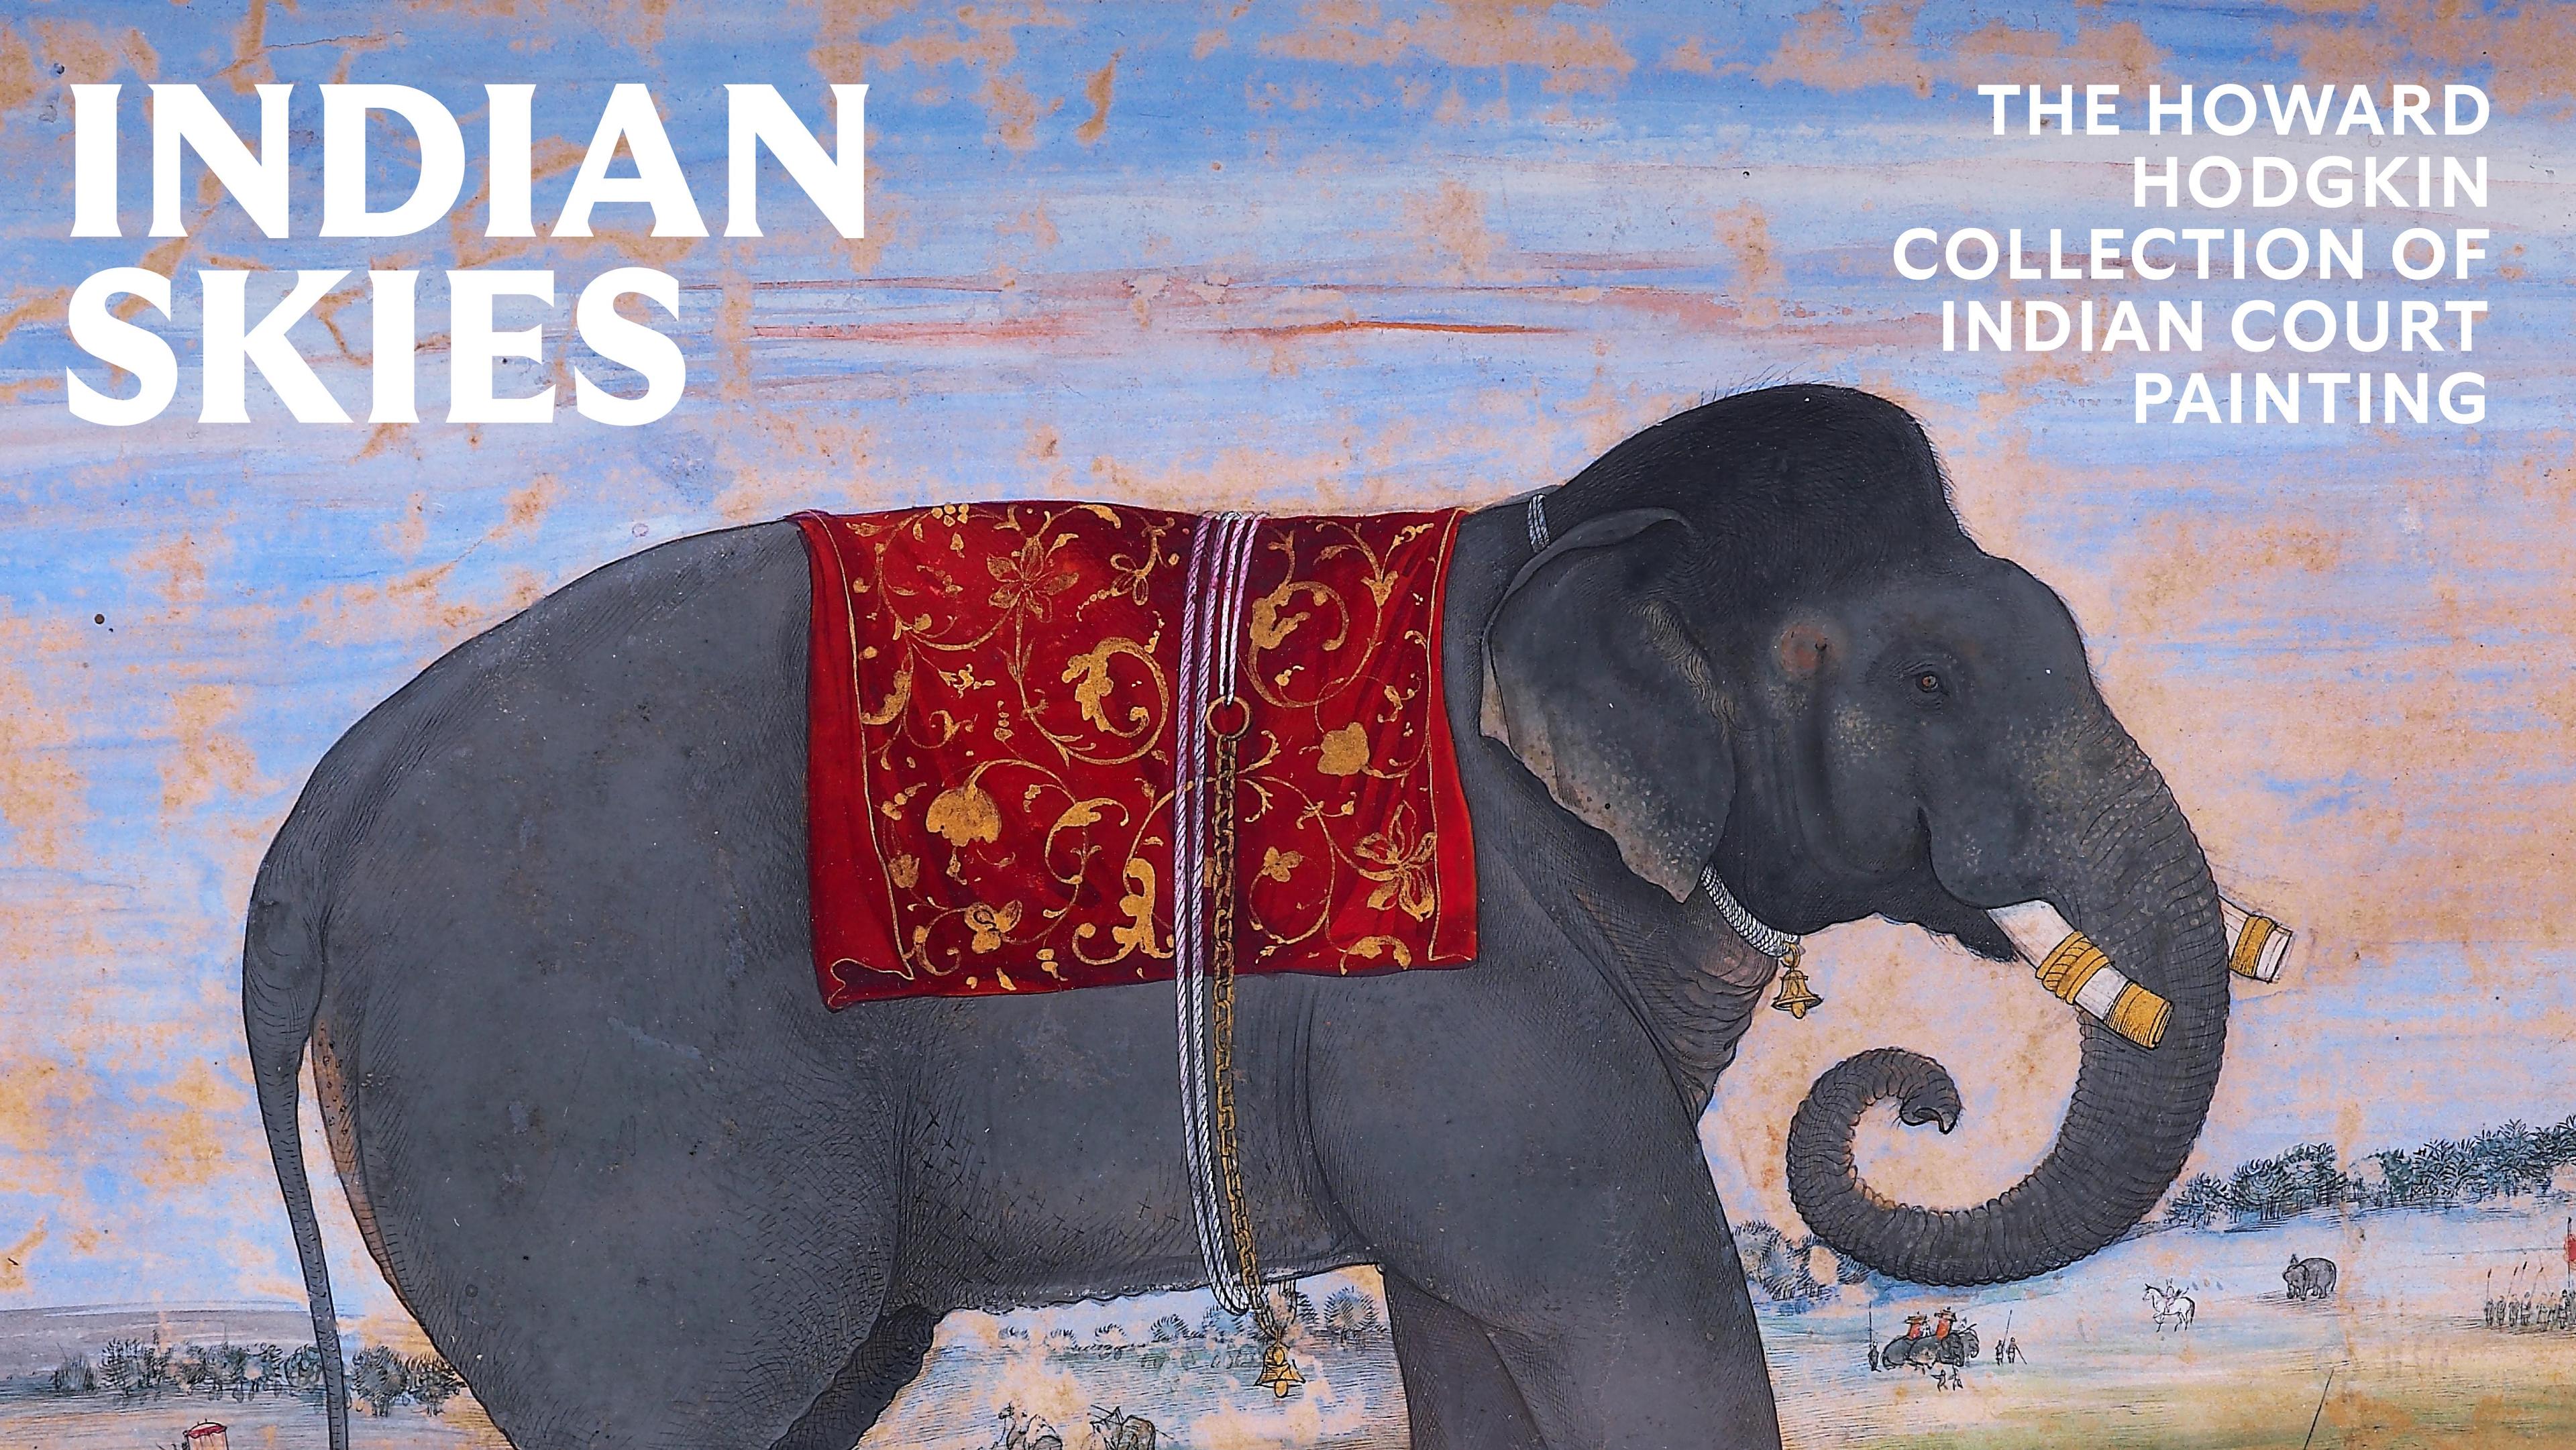 Large elephant print with text reading Indian Skies with a sherbet color paint strokes